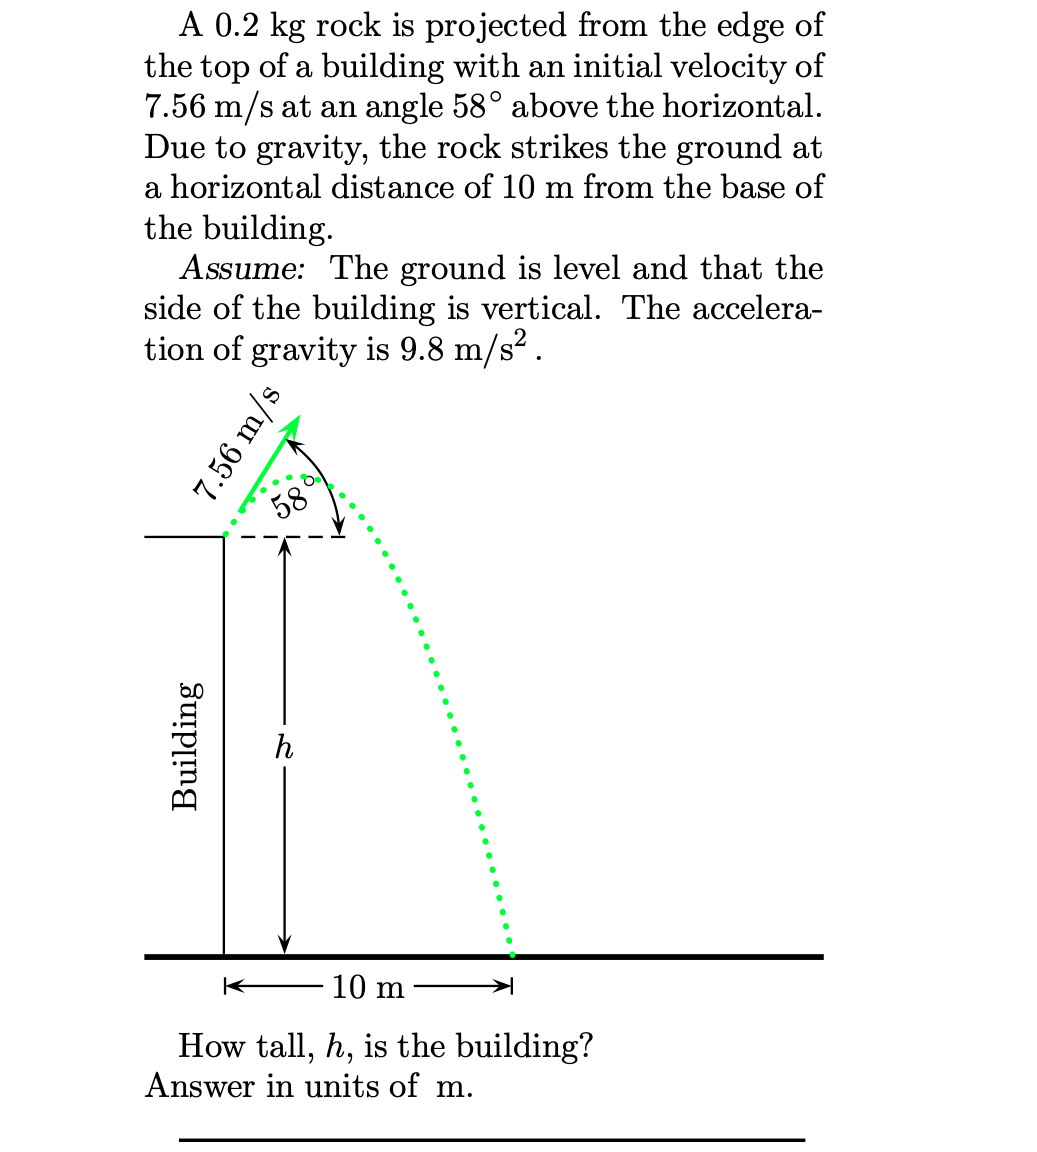 A 0.2 kg rock is projected from the edge of
the top of a building with an initial velocity of
7.56 m/s at an angle 58° above the horizontal.
Due to gravity, the rock strikes the ground at
a horizontal distance of 10 m from the base of
the building.
Assume: The ground is level and that the
side of the building is vertical. The accelera-
tion of gravity is 9.8 m/s2.
58
h
10 m
How tall, h, is the building?
Answer in units of m.
7.56 m/s
Building
